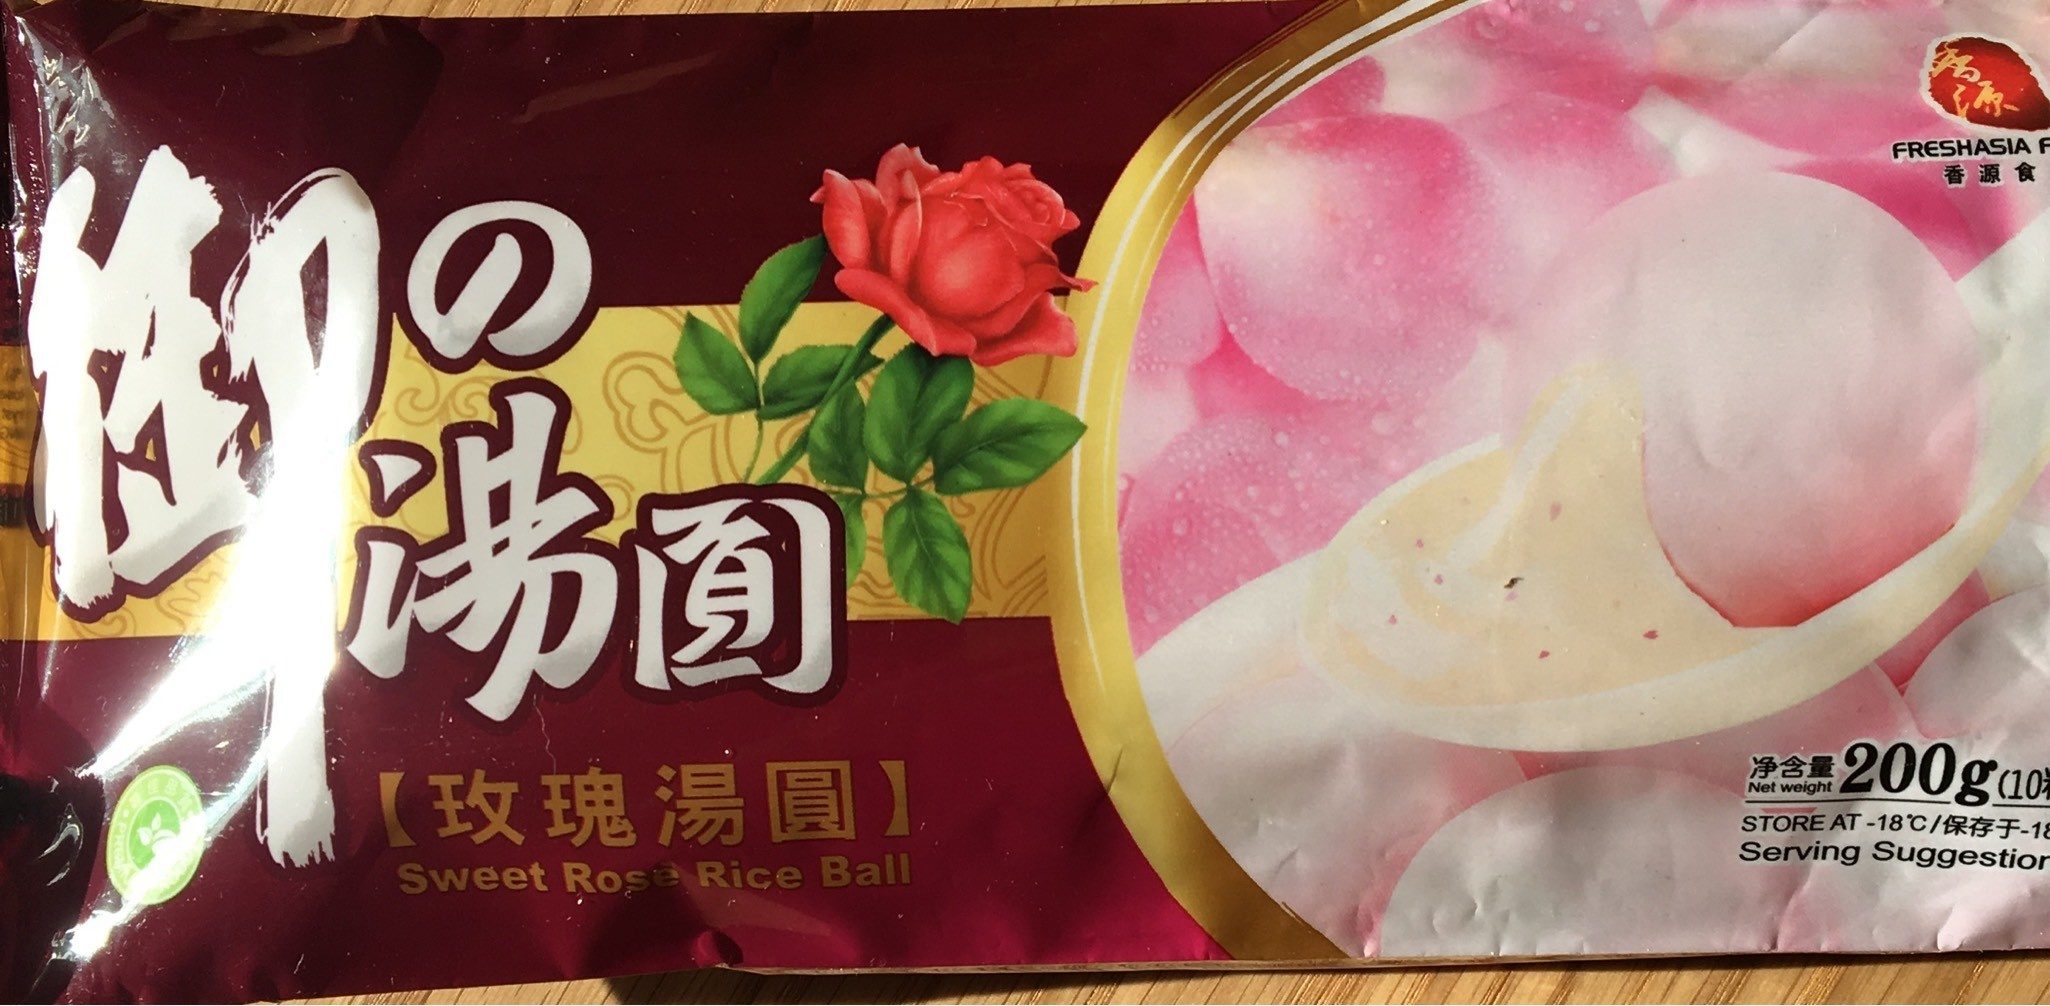 Sweet rose rice ball - Product - fr